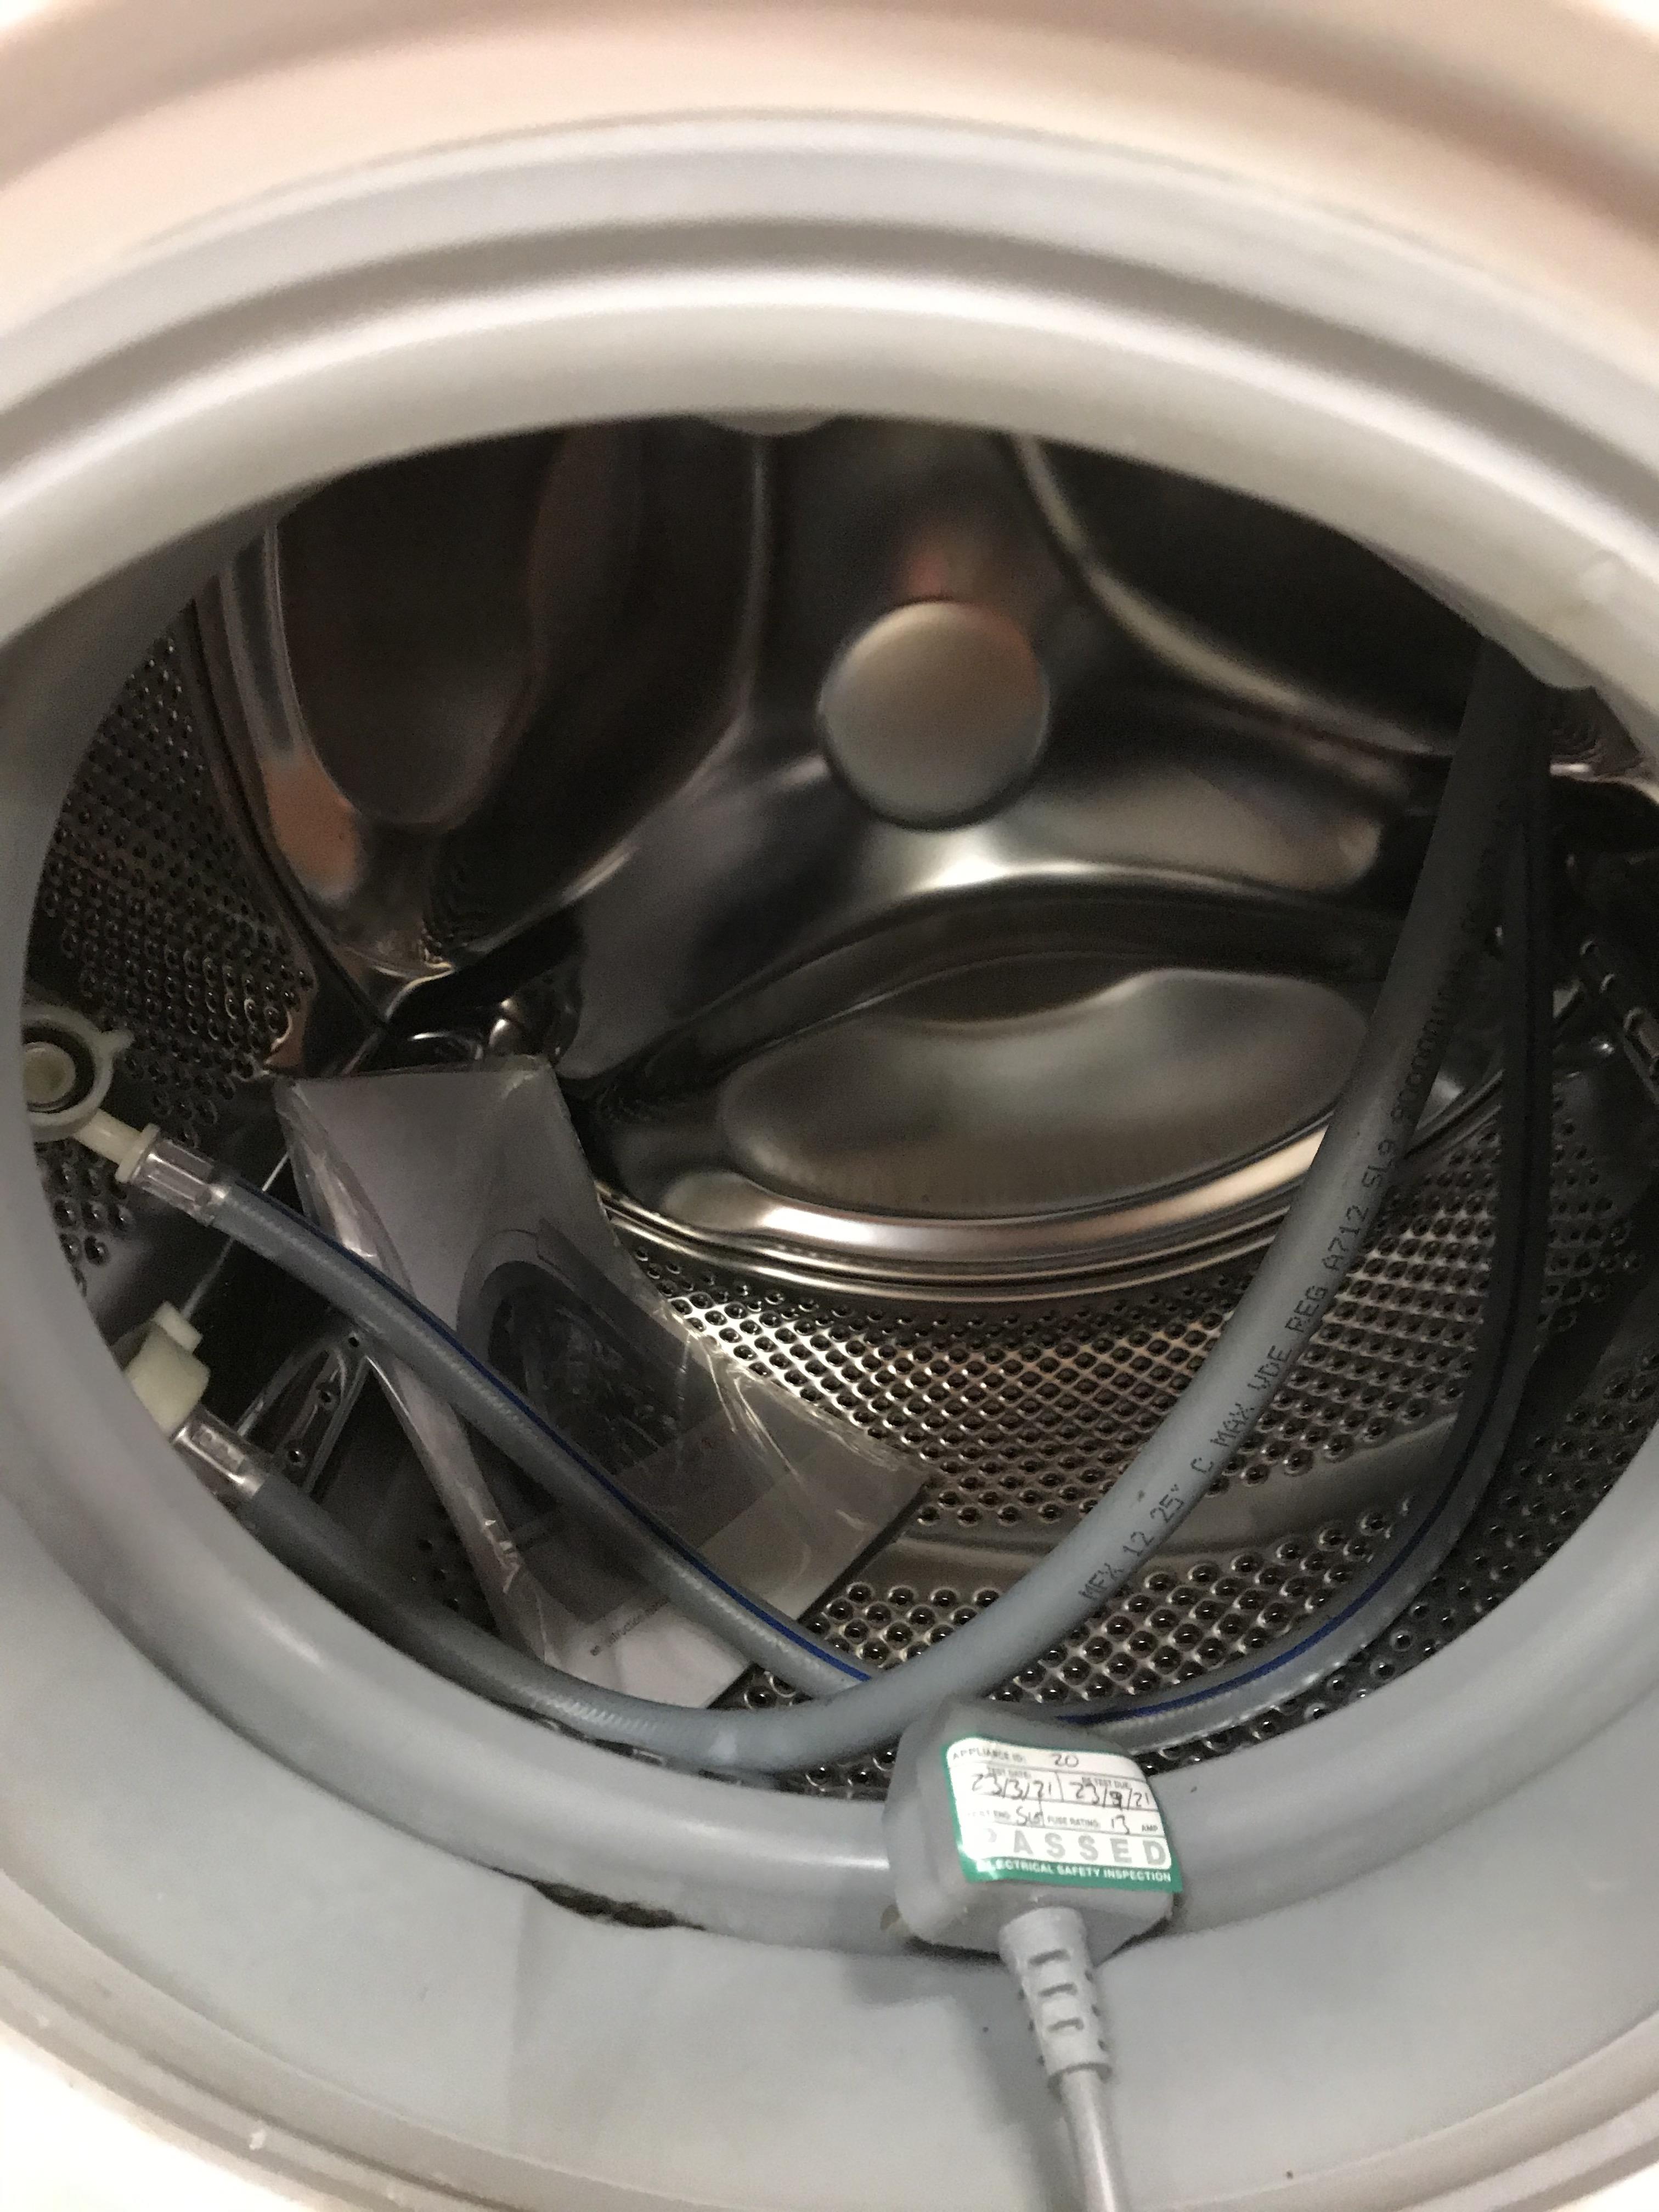 A Bosch Classixx 7 Vario Perfect washing machine CONDITION REPORTS Plastic on the - Image 5 of 9